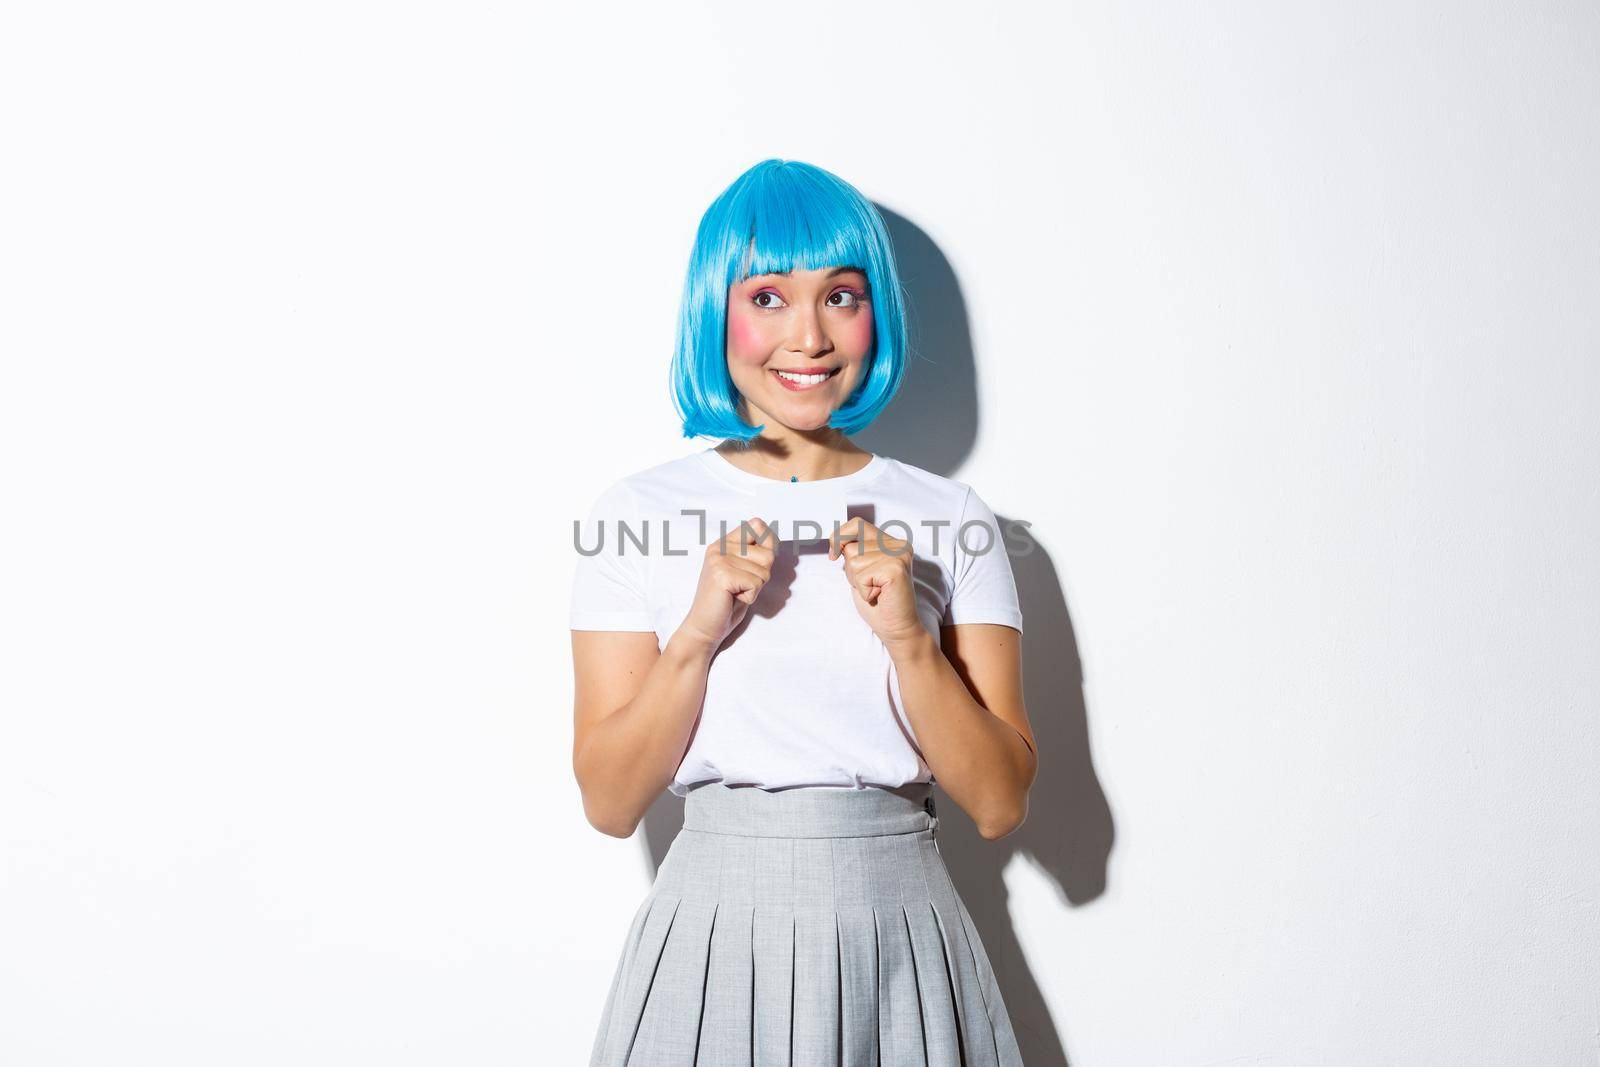 Portrait of silly smiling girl dreaming of shopping, looking upper left corner tempted and holding credit card, wearing halloween costume with blue short wig.